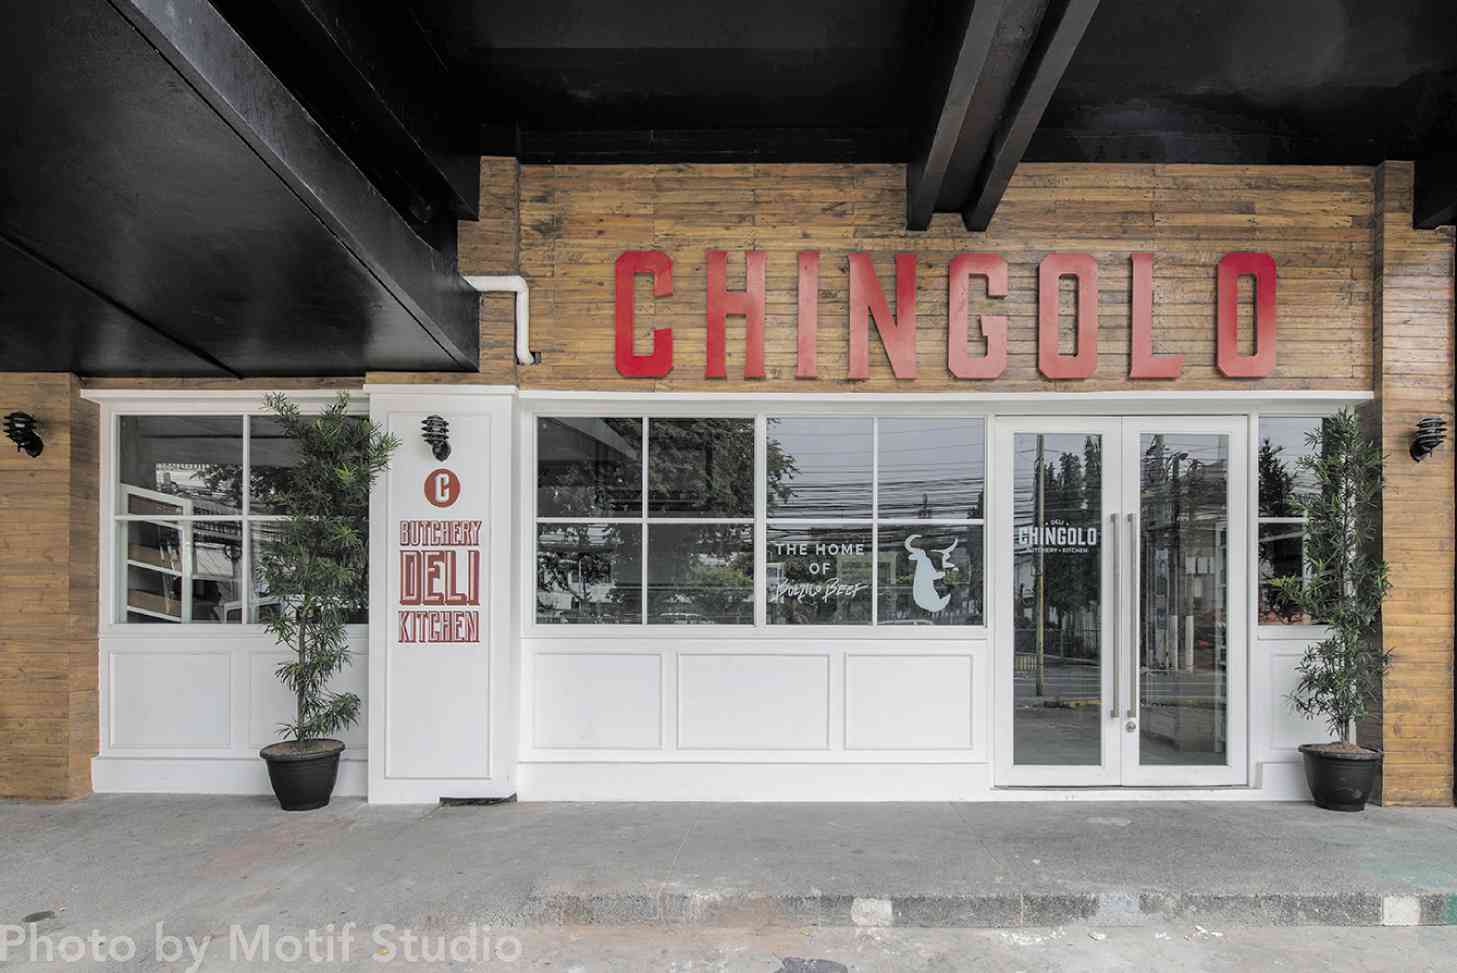 Chingolo is a deli with a 20-seat dining space.